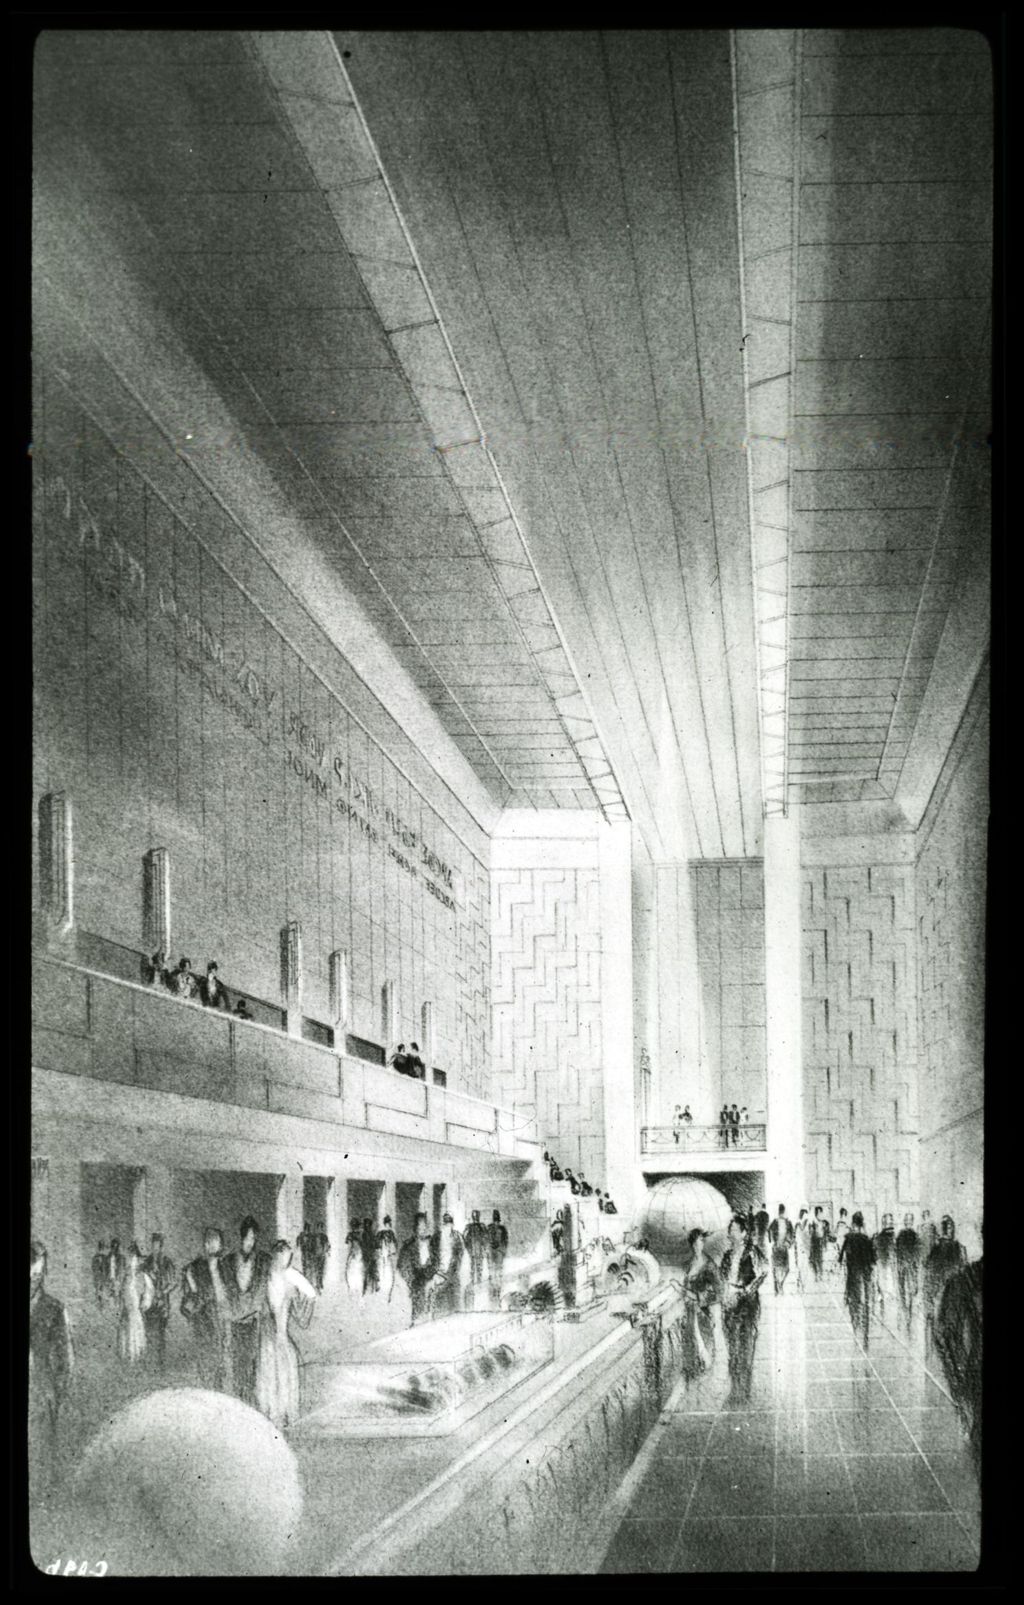 Artist's sketch of the Great Hall at the Century of Progress Hall of Science